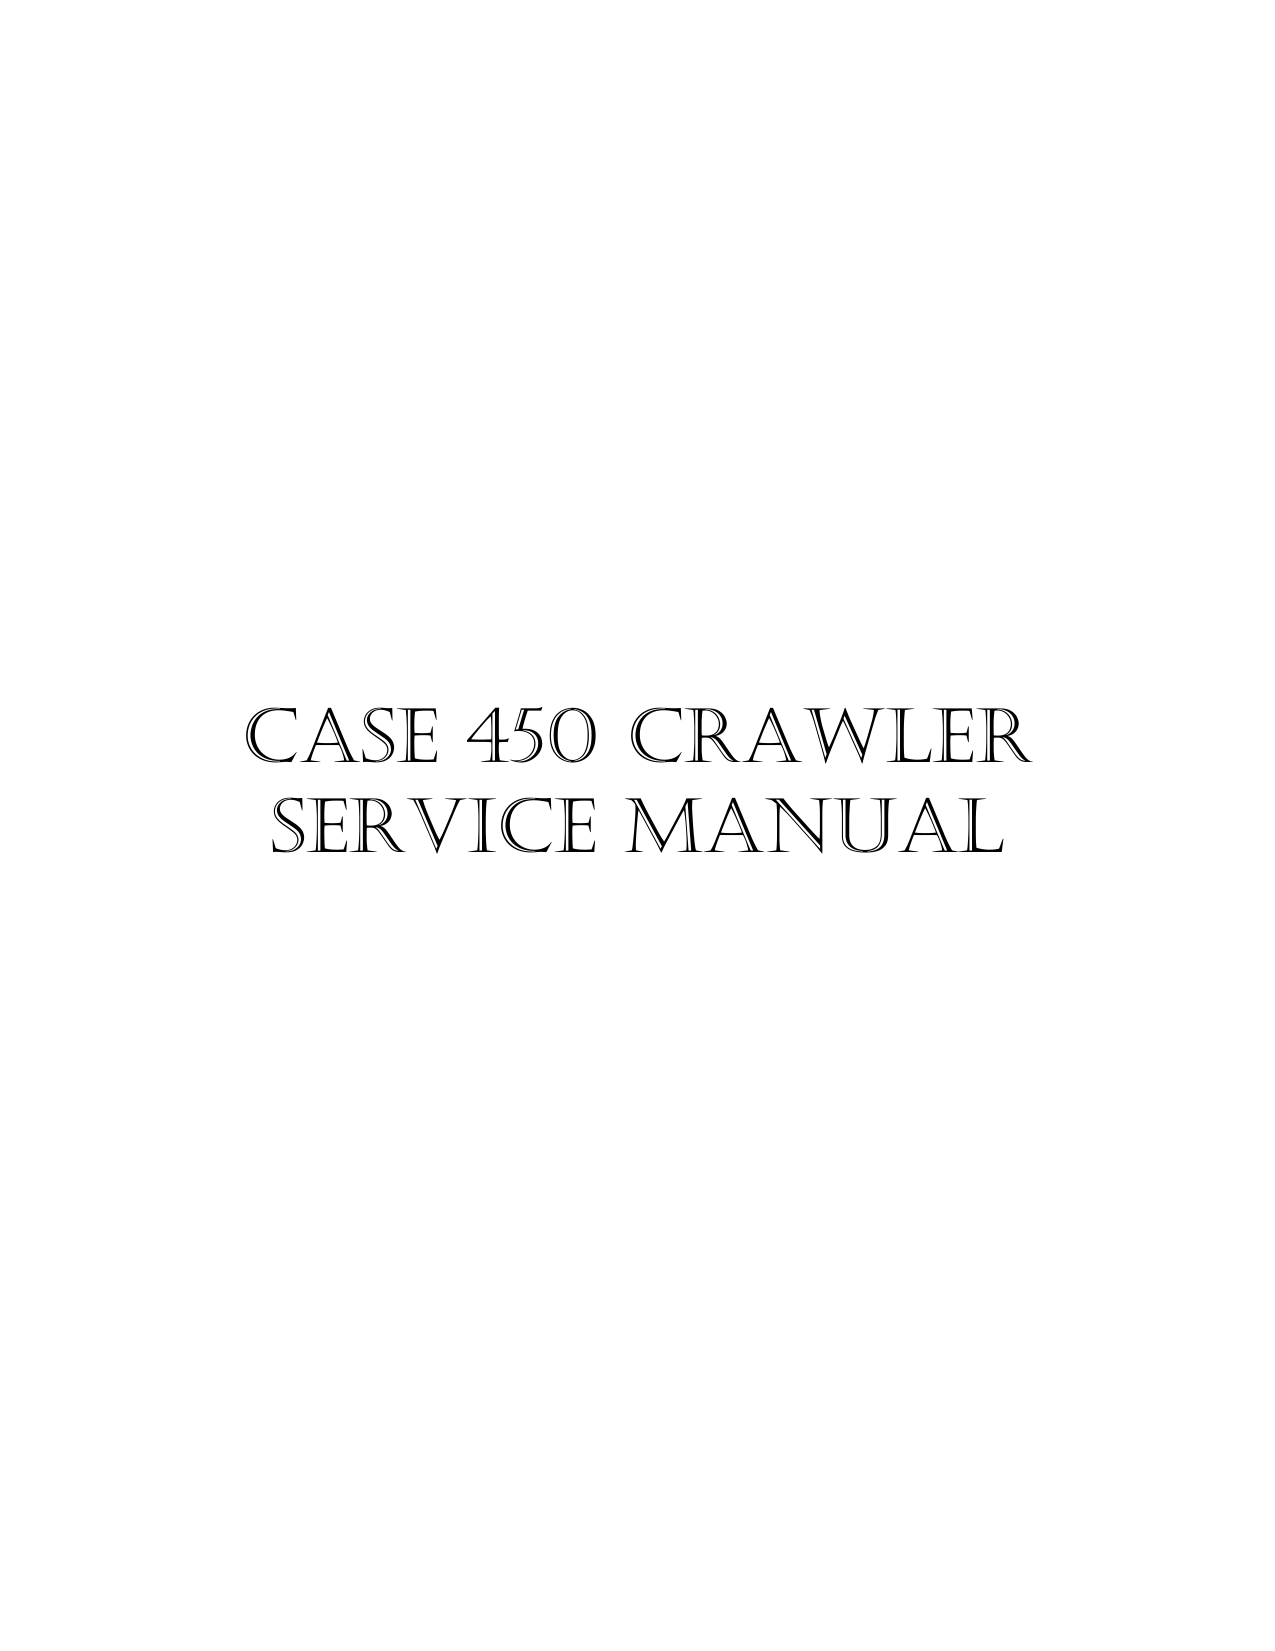 Case 450 tractor carwler service manual Preview image 1